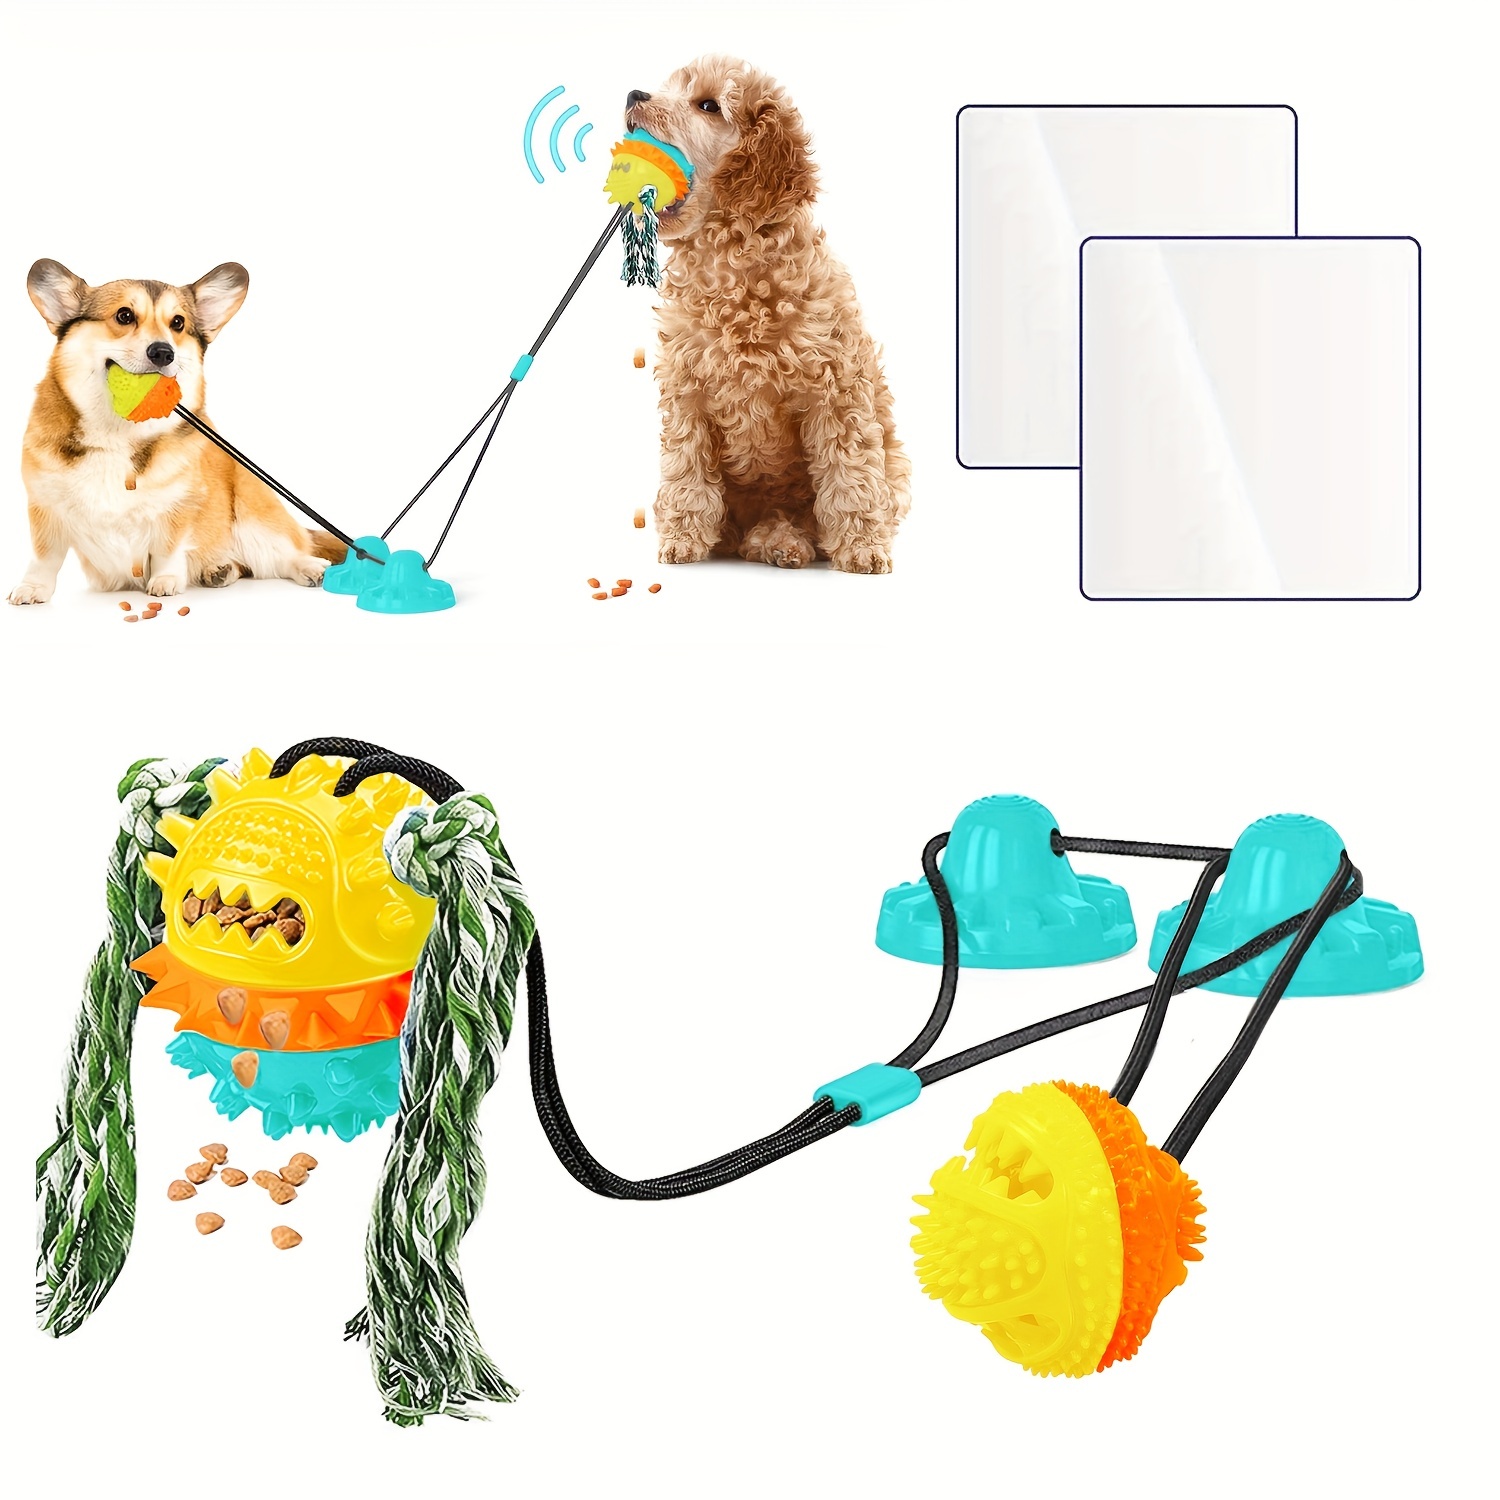 Suction Cup Dog Toy Chews Bite Toys Durable Rubber Self Playing  Multifunctional